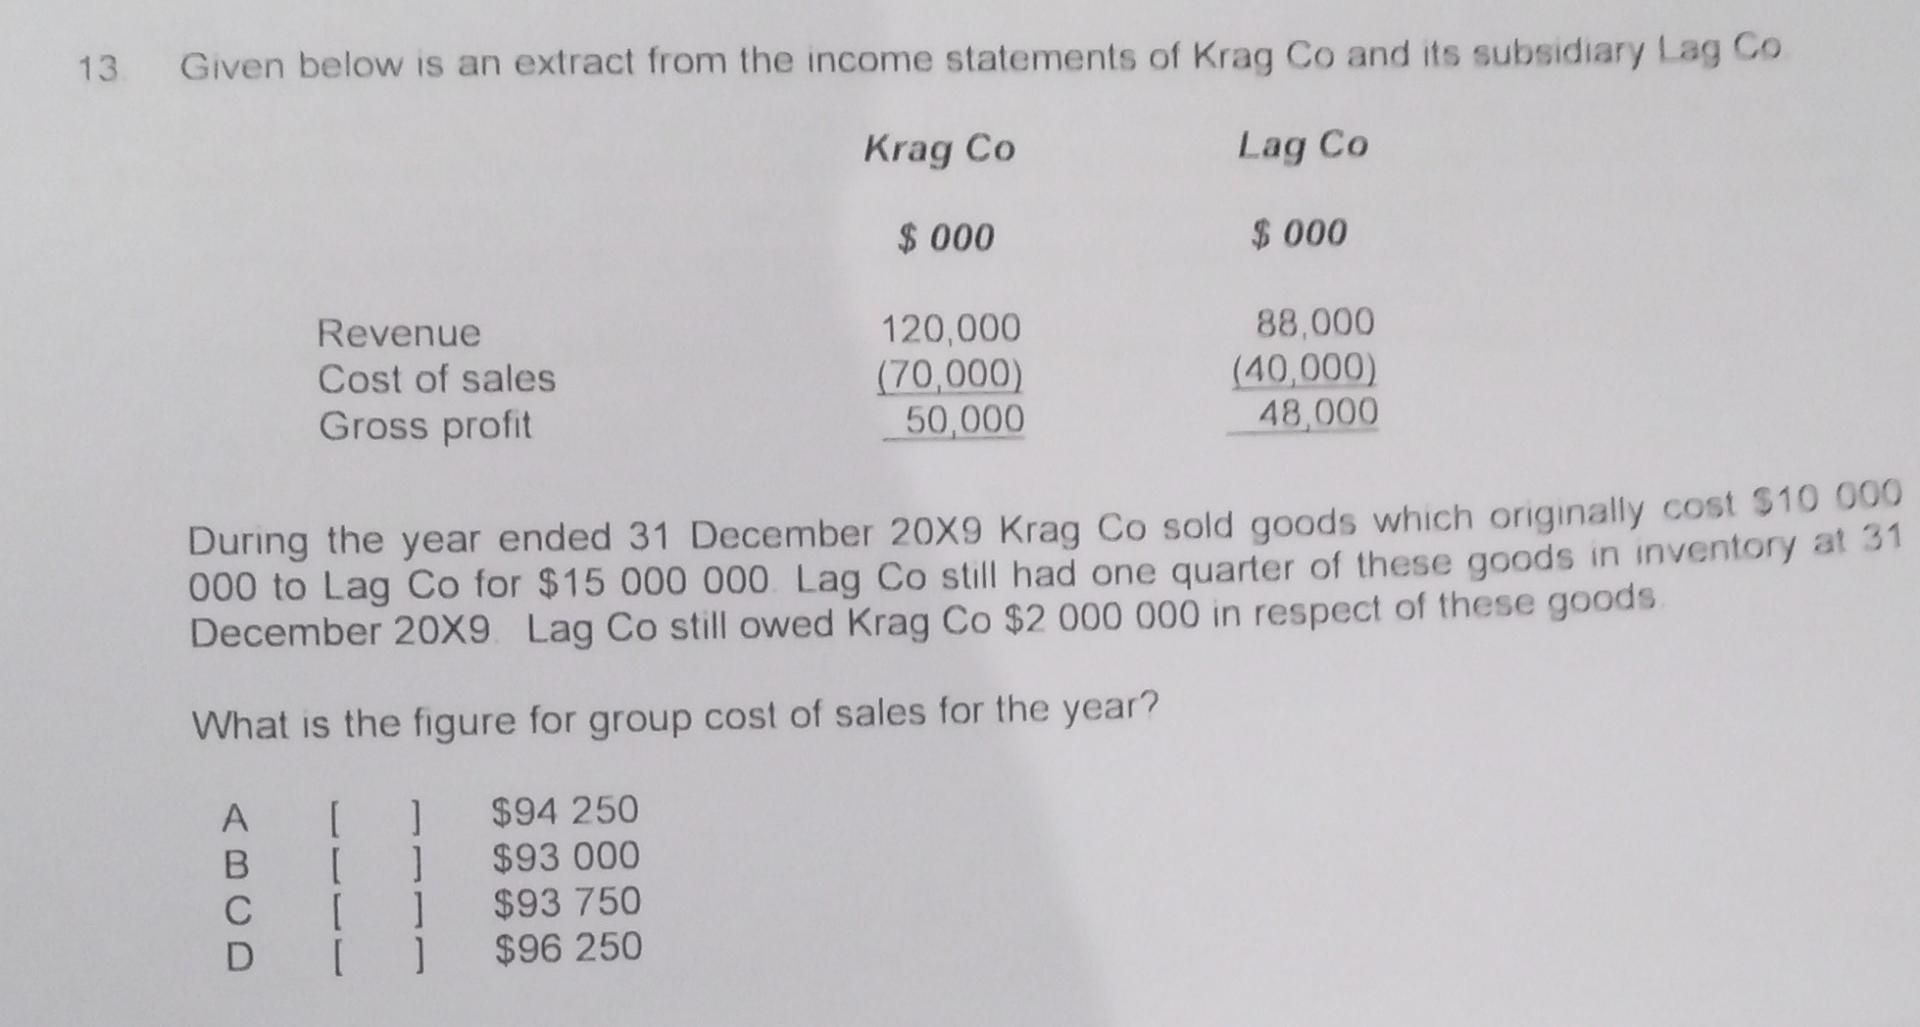 13. Given below is an extract from the income statements of Krag Co and its subsidiary Lag Co Krag Co Lag Co